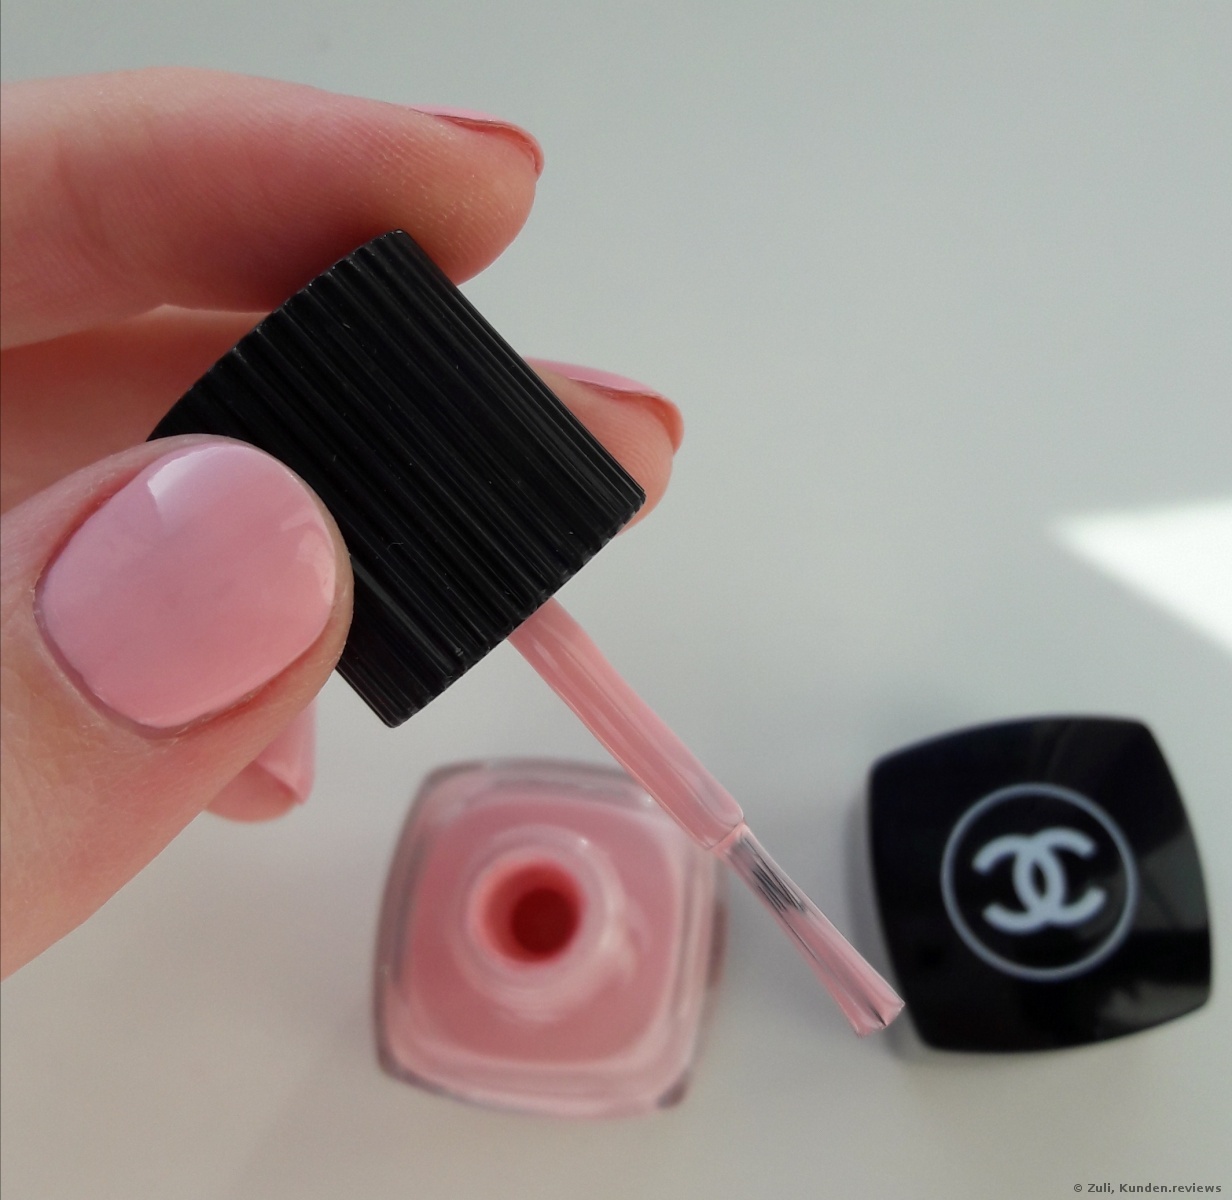 Chanel Neapolis: New City collection Spring-Summer 2018 Nagellack Foto